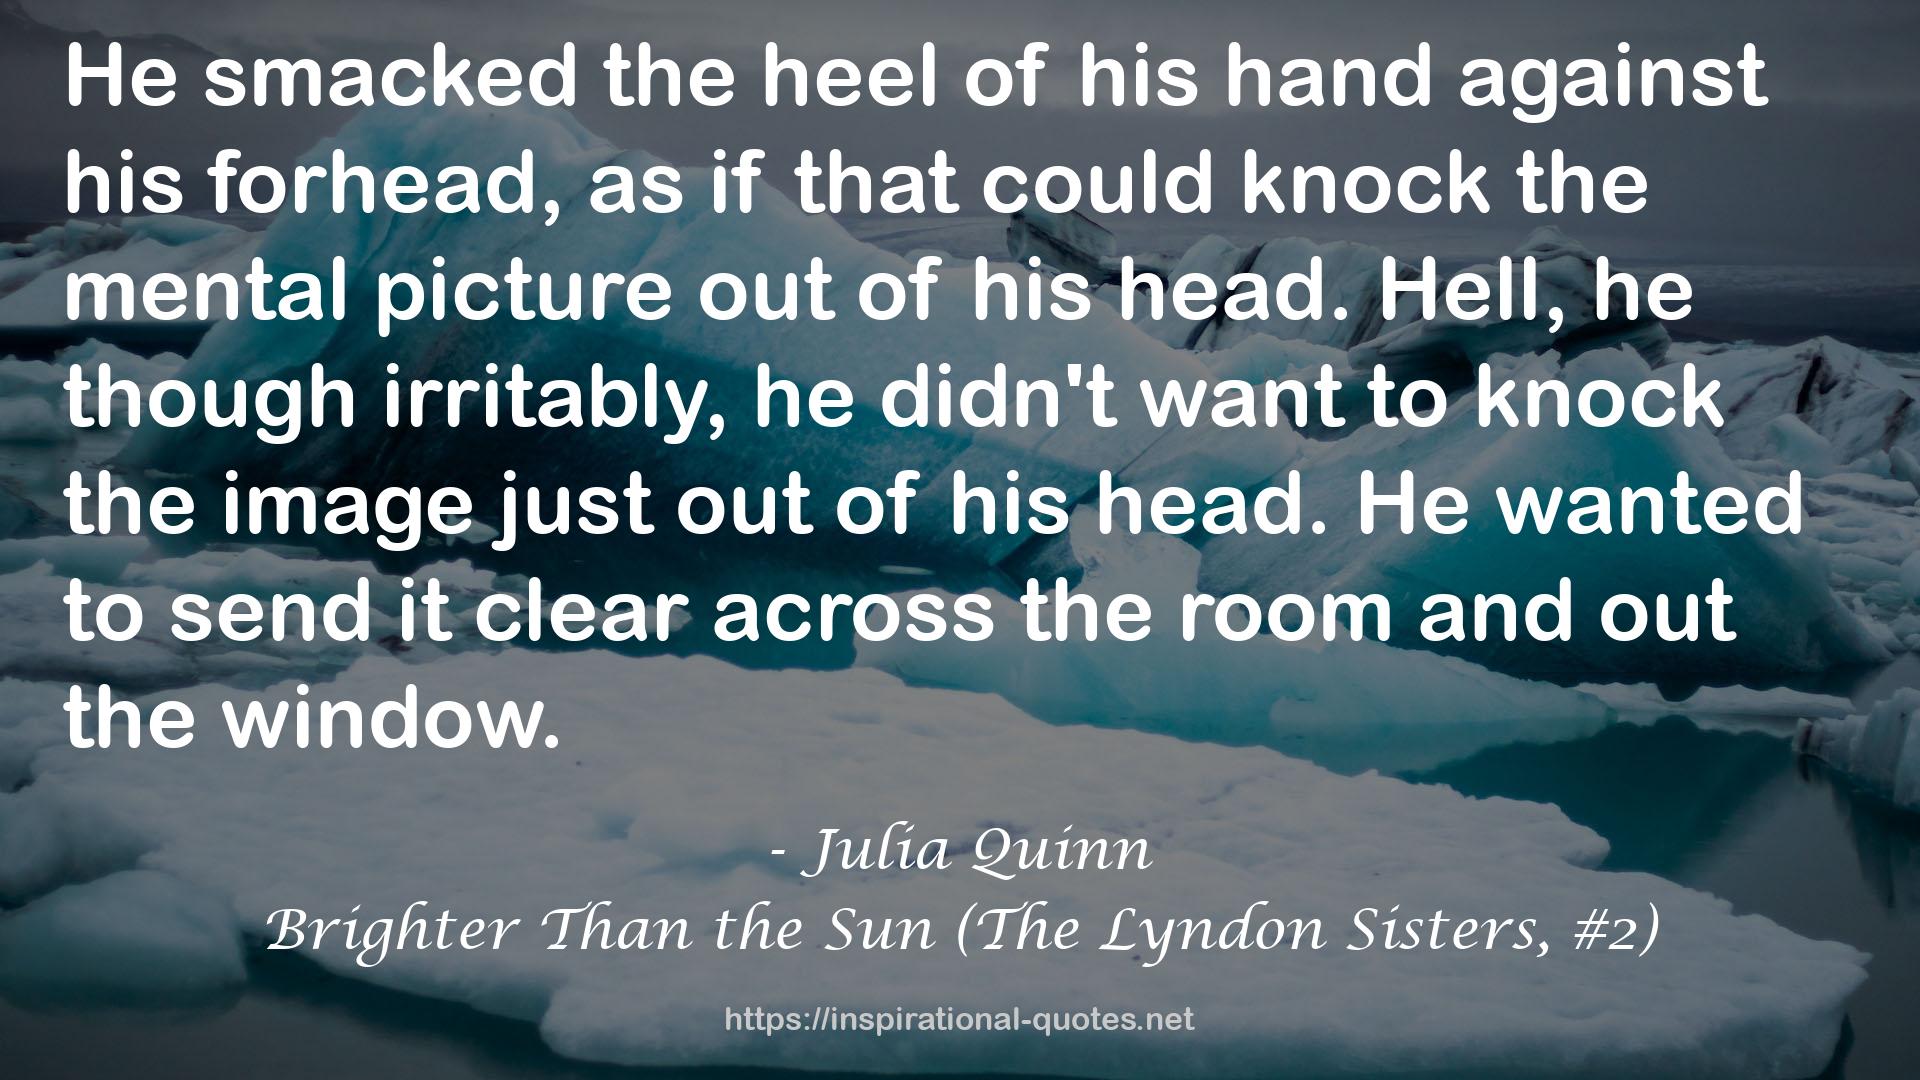 Brighter Than the Sun (The Lyndon Sisters, #2) QUOTES